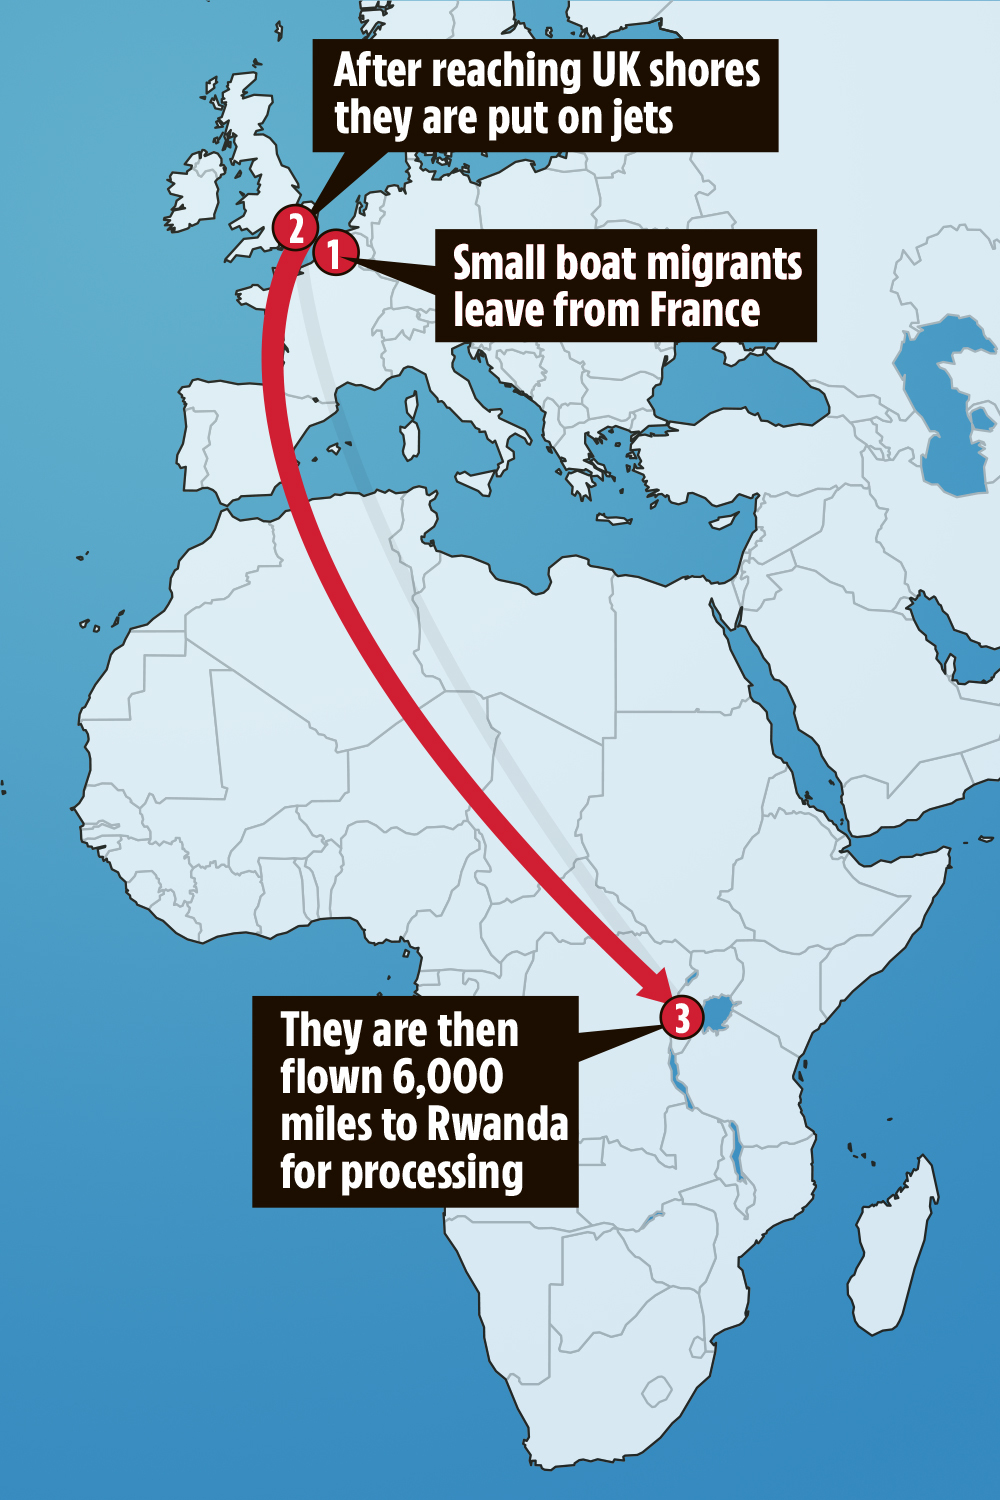 The migrants arriving across the Channel will be flown 6,000 to Rwanda